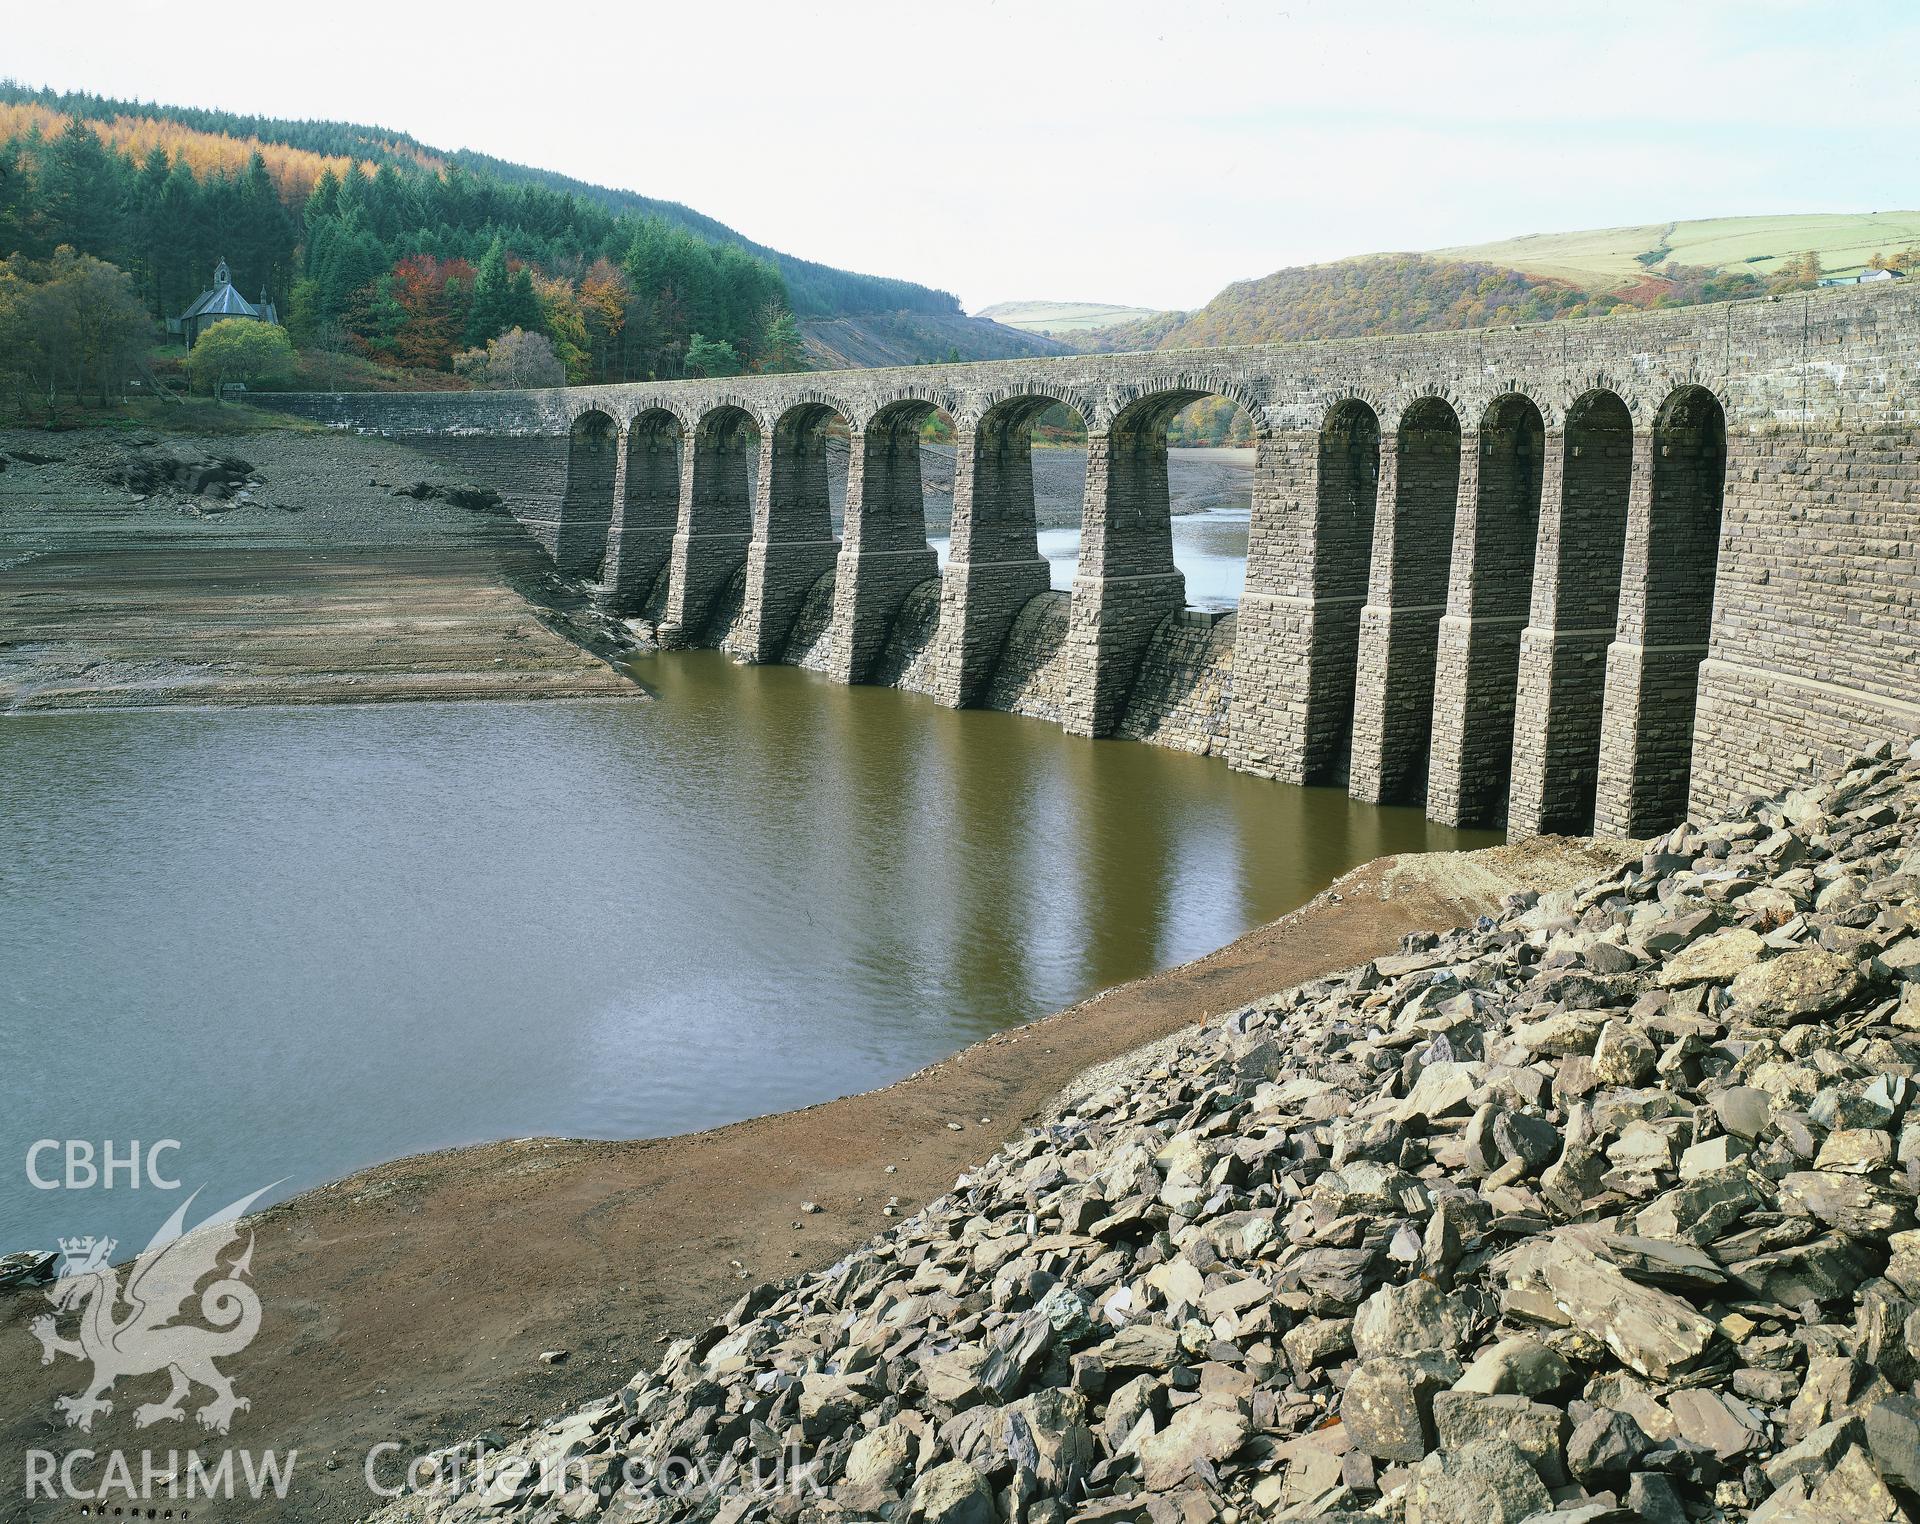 RCAHMW colour transparency of a general view at low water level of Pen y Garreg Dam.